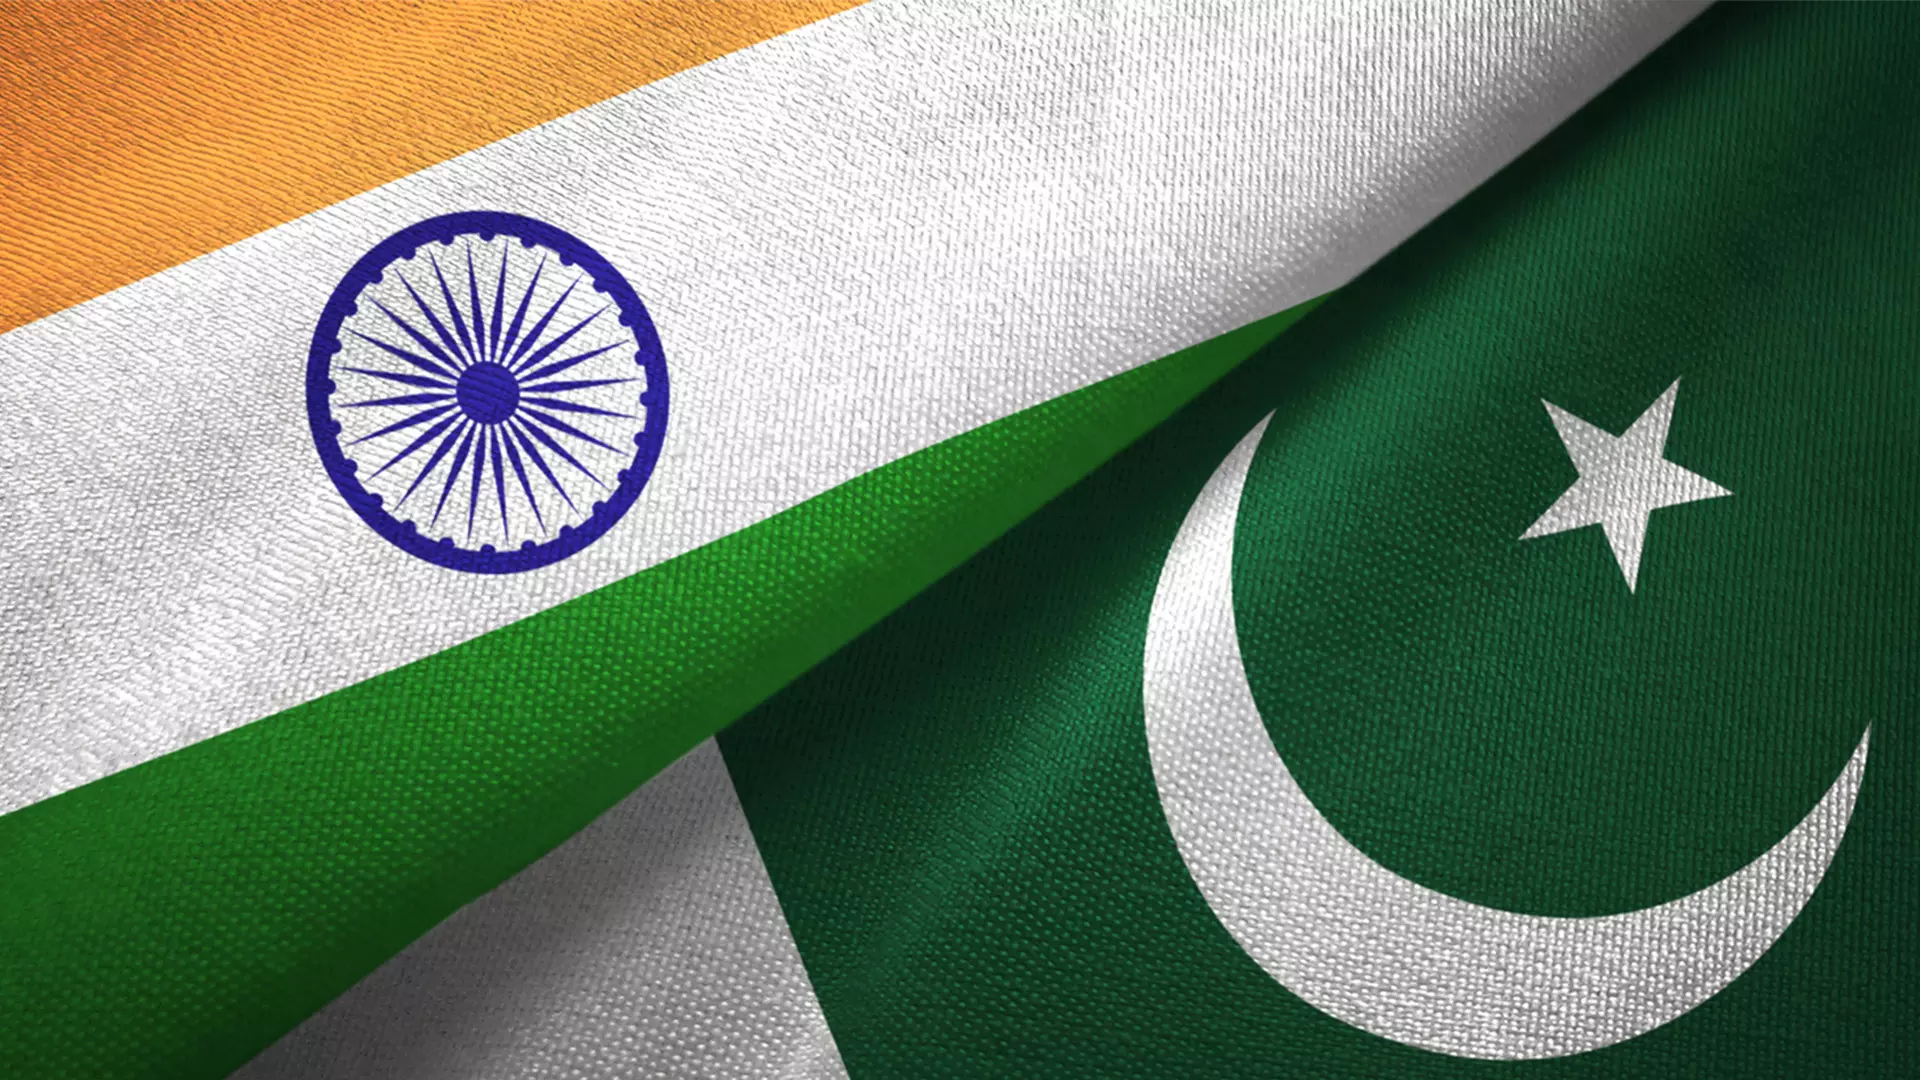 Amid frosty ties, India, Pakistan exchange list of nuclear installations